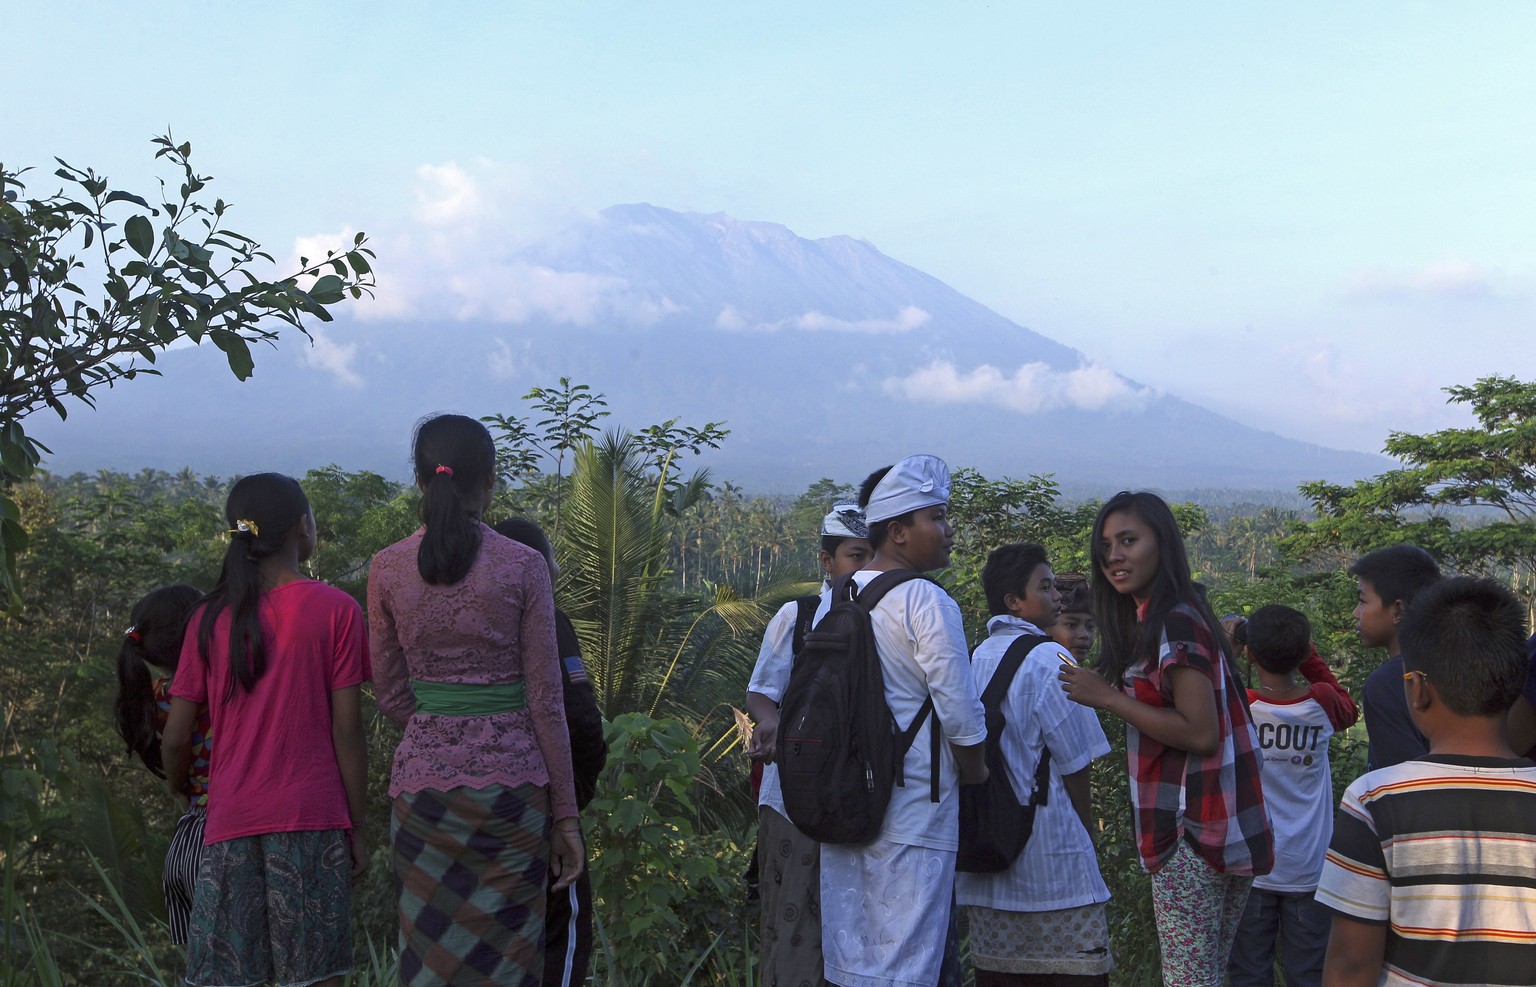 Residents observe the Mount Agung from a viewing point in Bali, Indonesia, Wednesday, Sept. 20, 2017. Officials have more than doubled the size of the evacuation zone around the Mount Agung volcano on ...